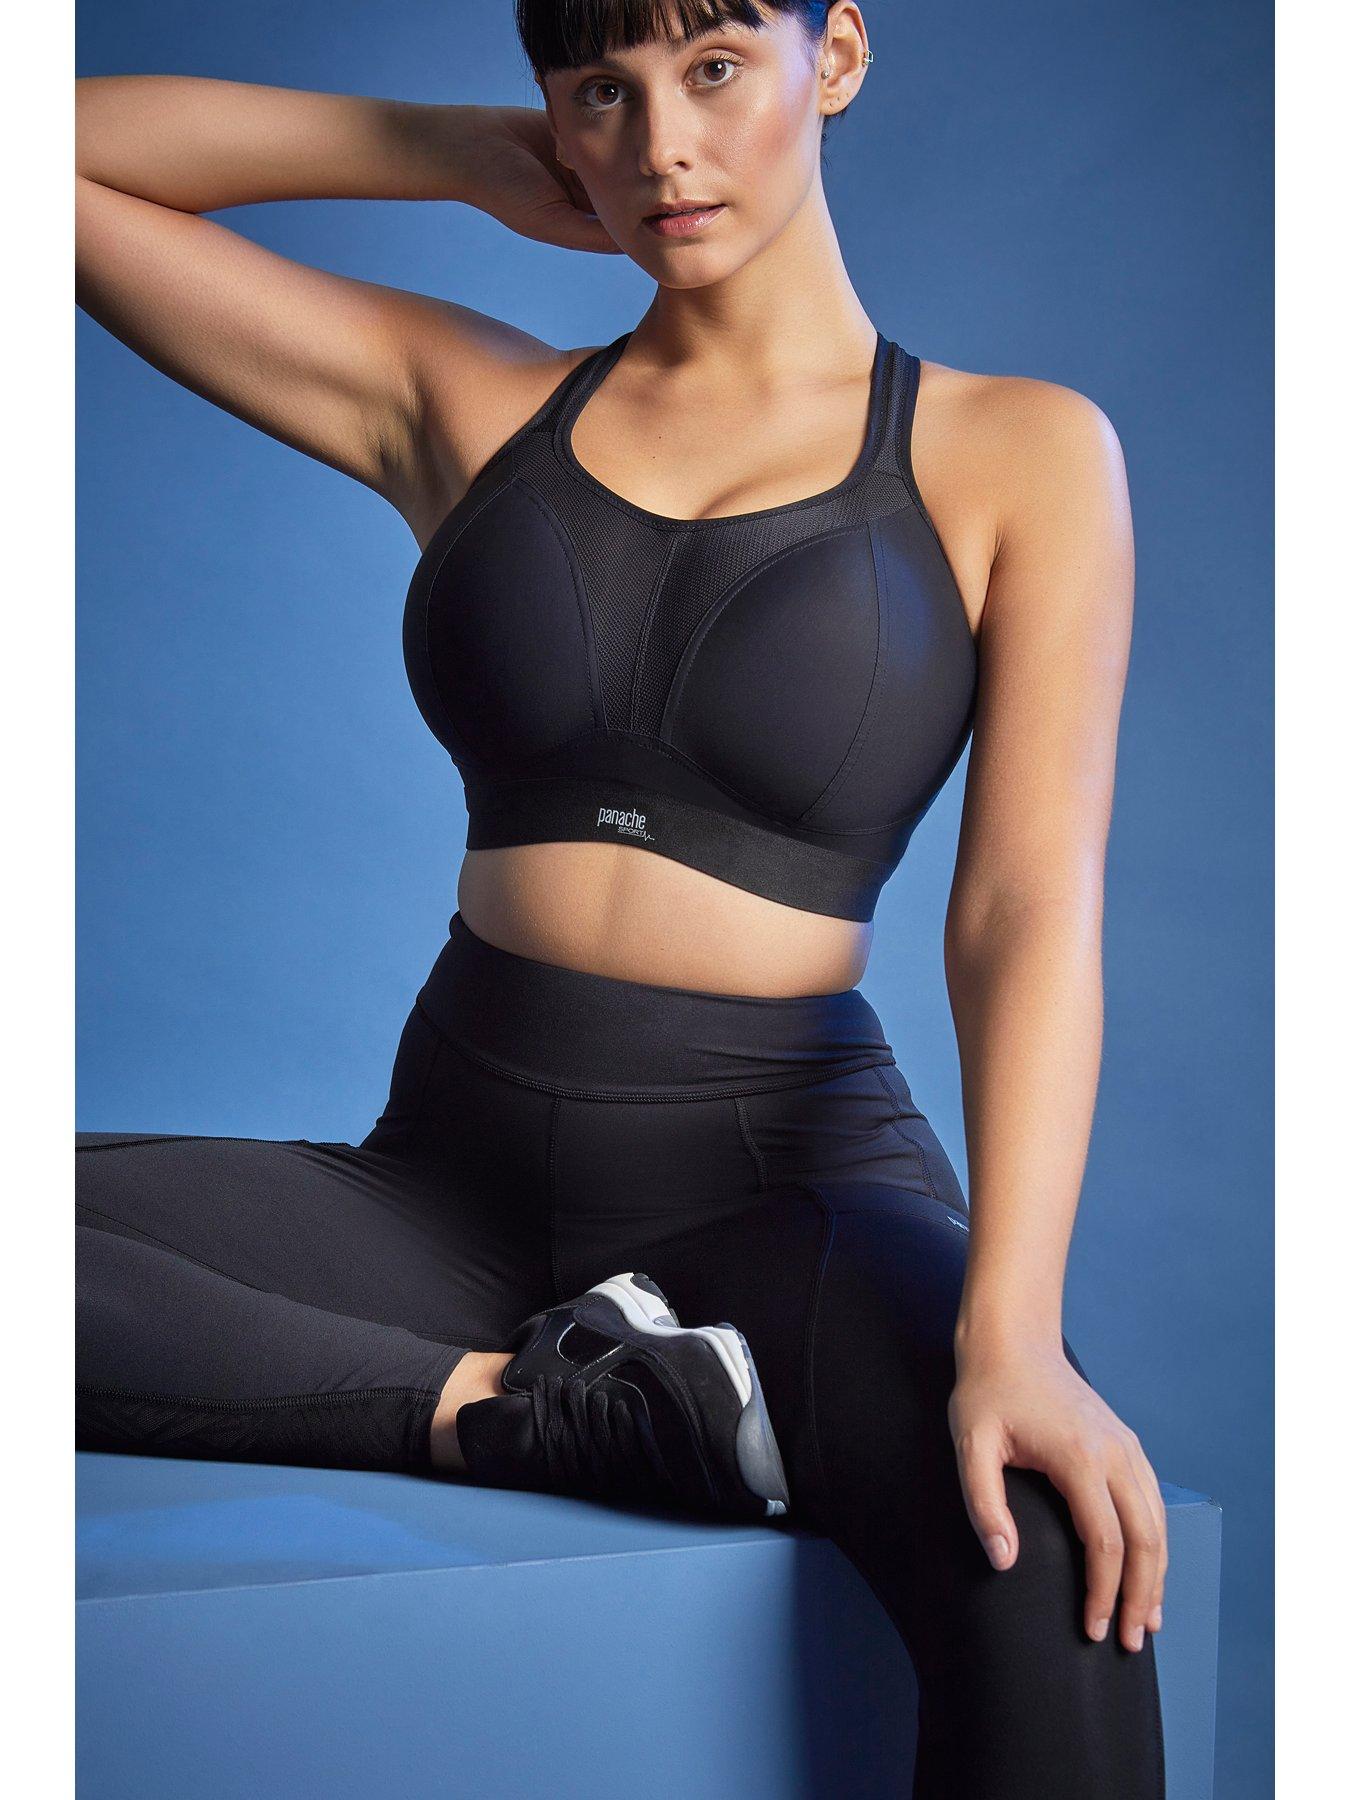 Buy Medium Impact Padded Non-Wired Sports Bra in Baby Blue